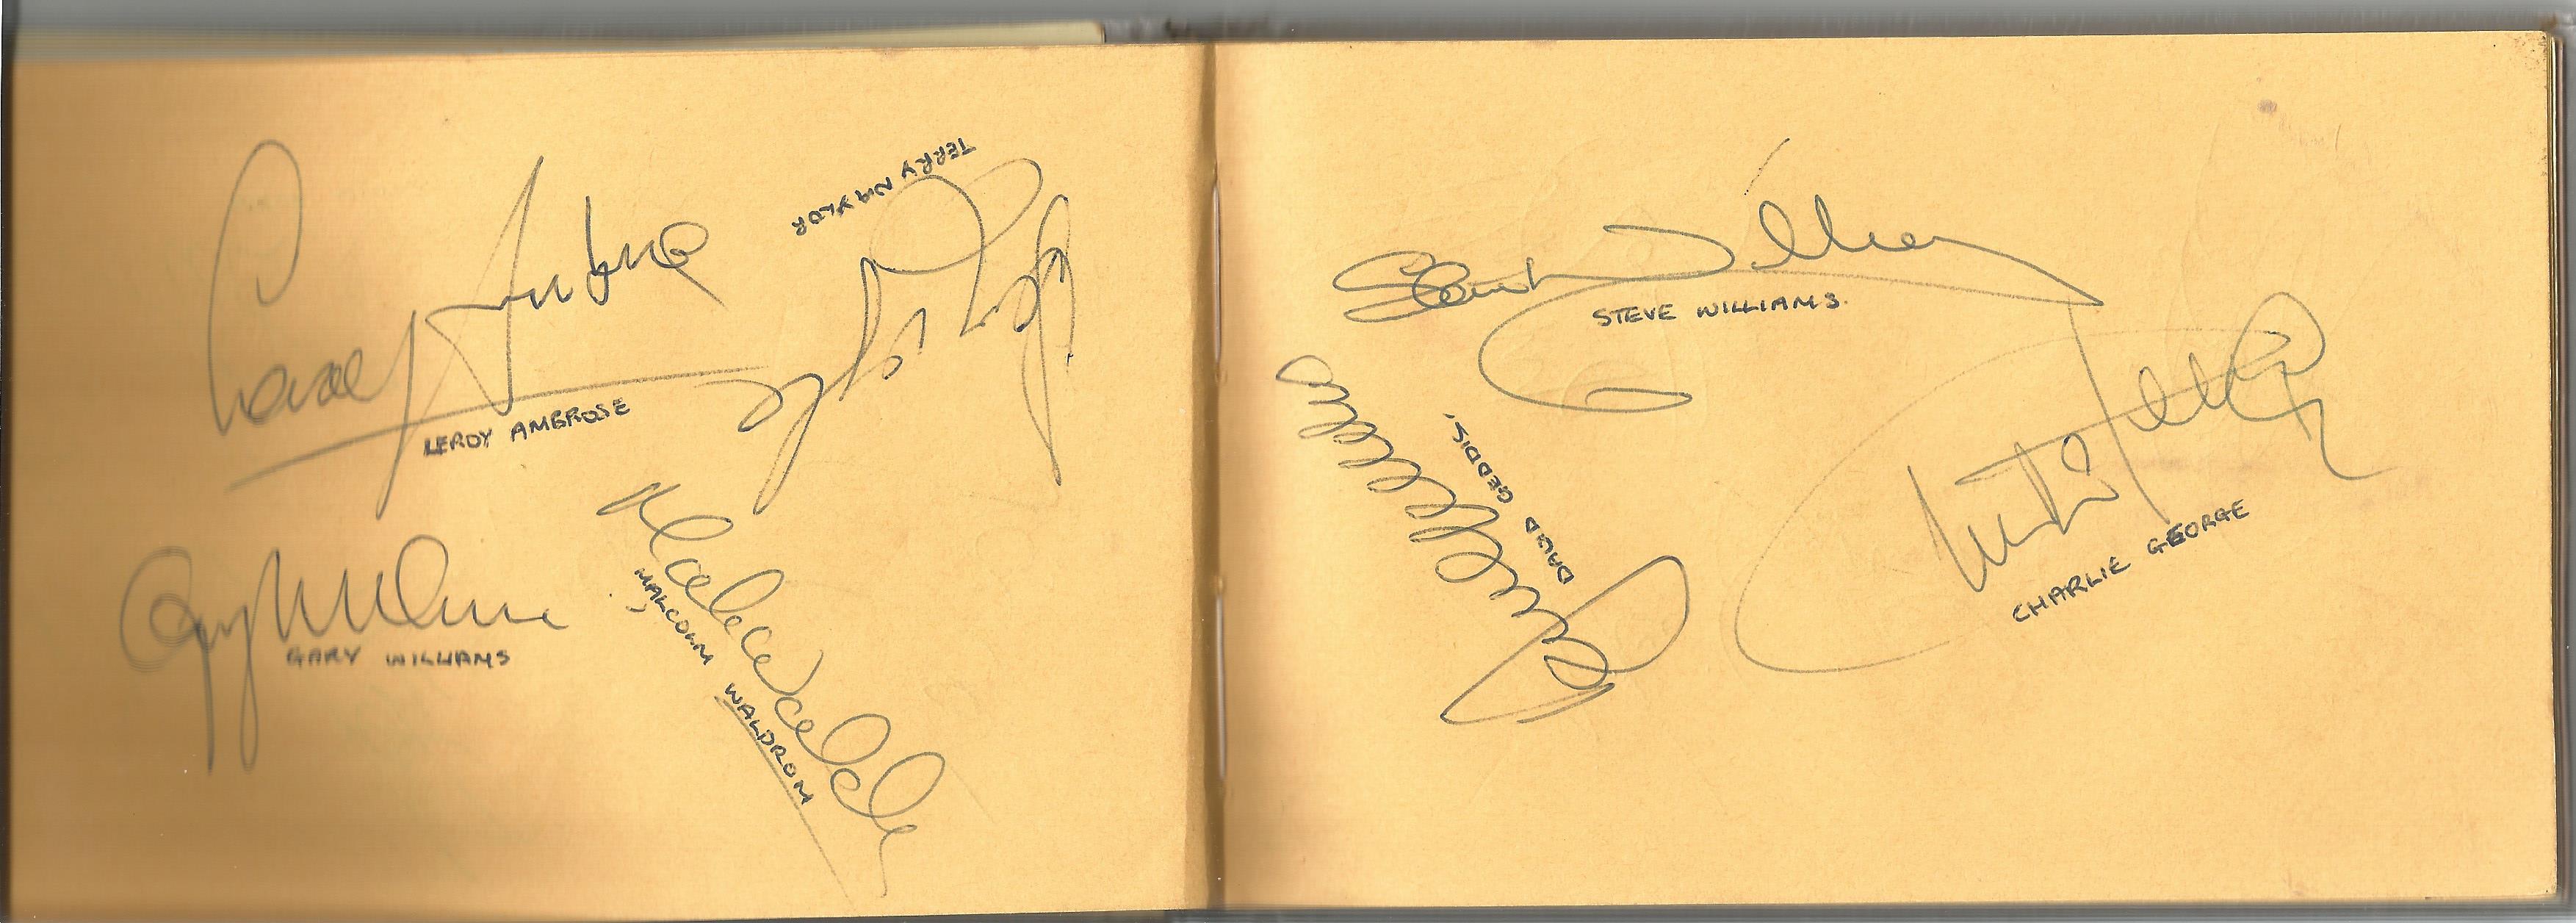 Football and Cricket Legends Autograph book over 150 signatures from some legendary names of the - Image 7 of 8